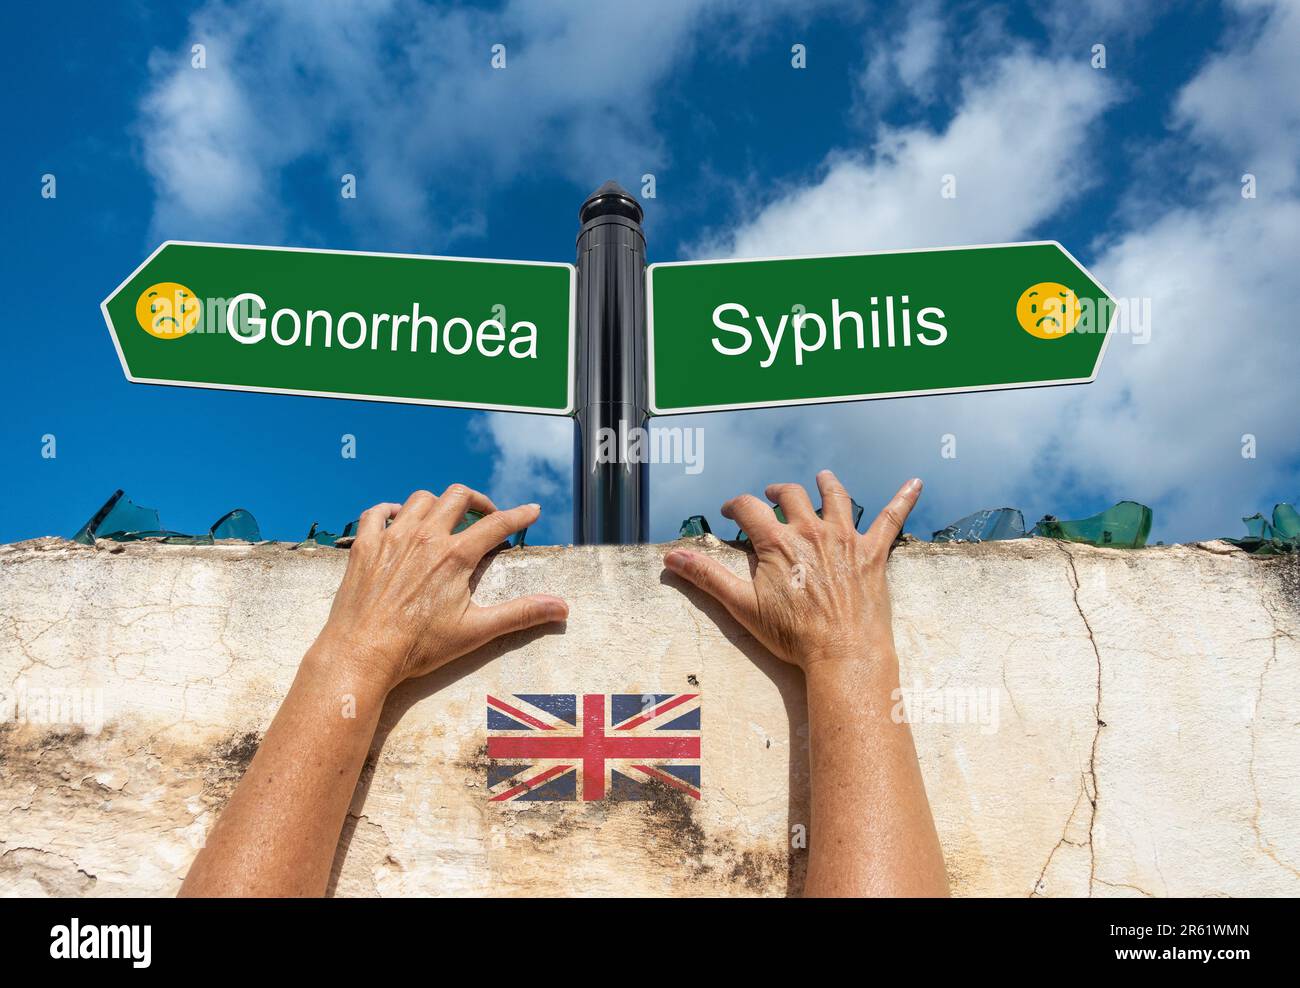 Gonorrhoea and Syphilis concept sign with sad face emoji. Record cases in 2022 in England. Stock Photo